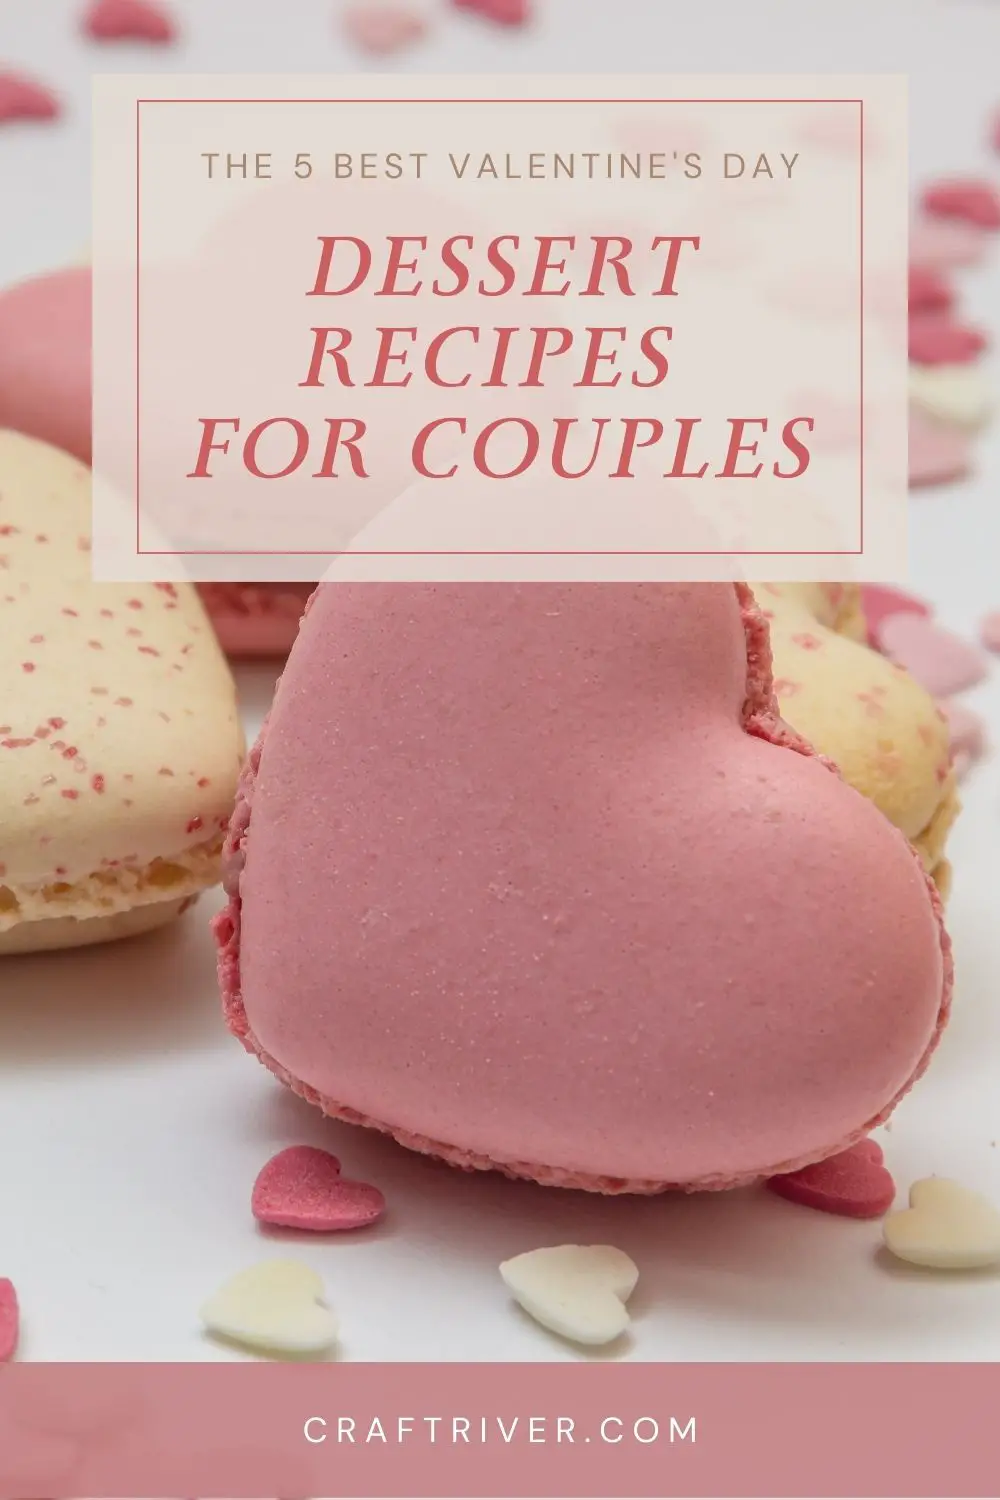 5 Mouth-Watering Valentine's Day Desserts for Couples